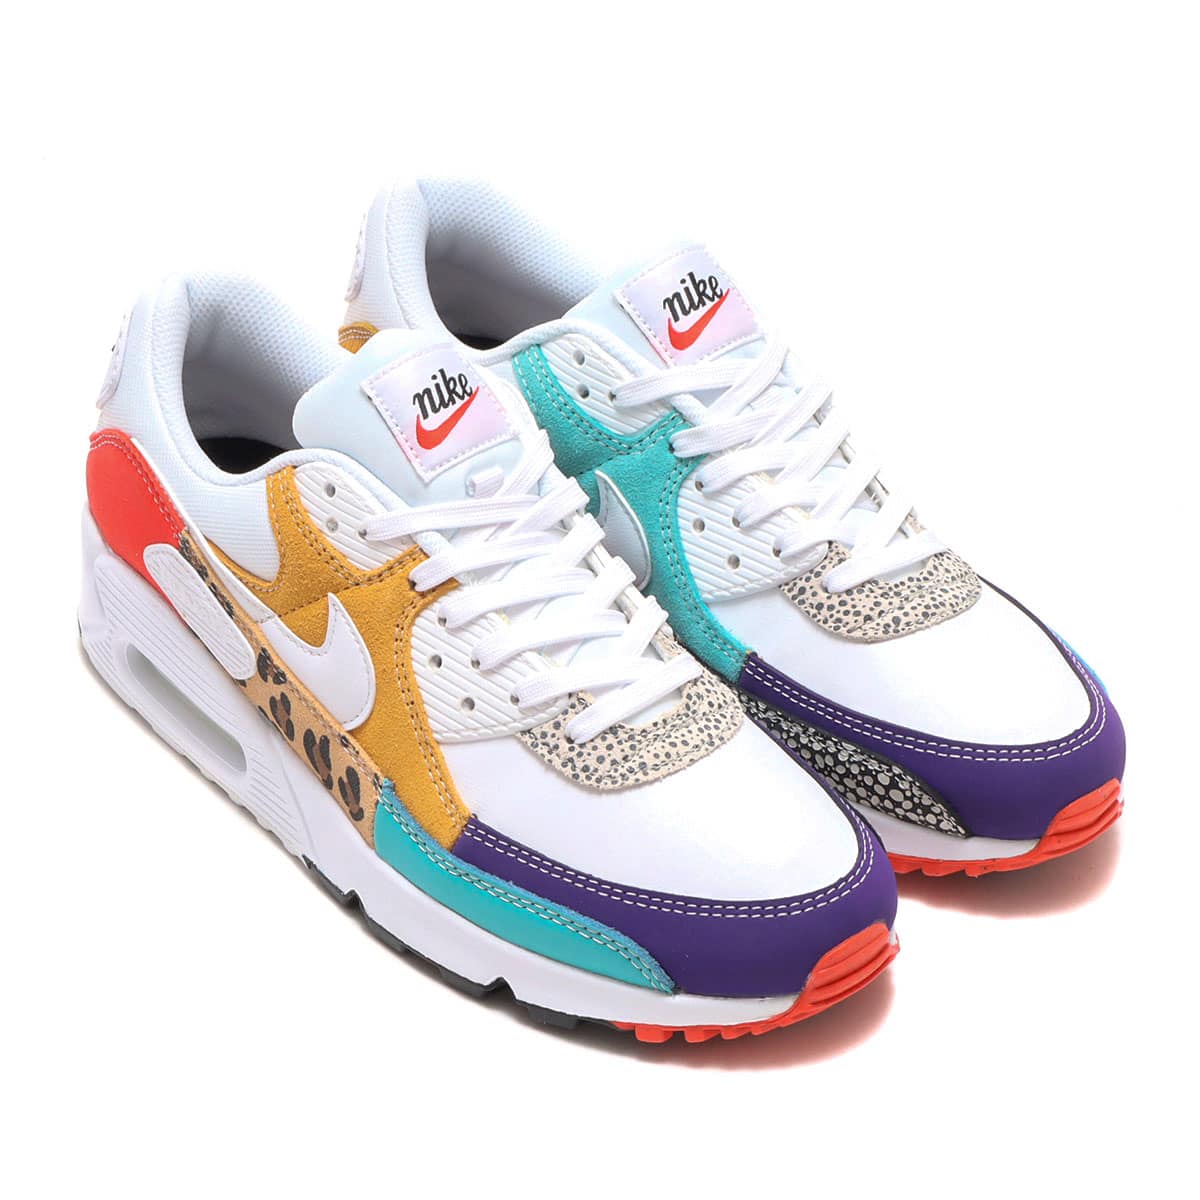 NIKE W AIR MAX 90 SE WHITE/WHITE-LIGHT CURRY-HABANERO RED 22SP-I